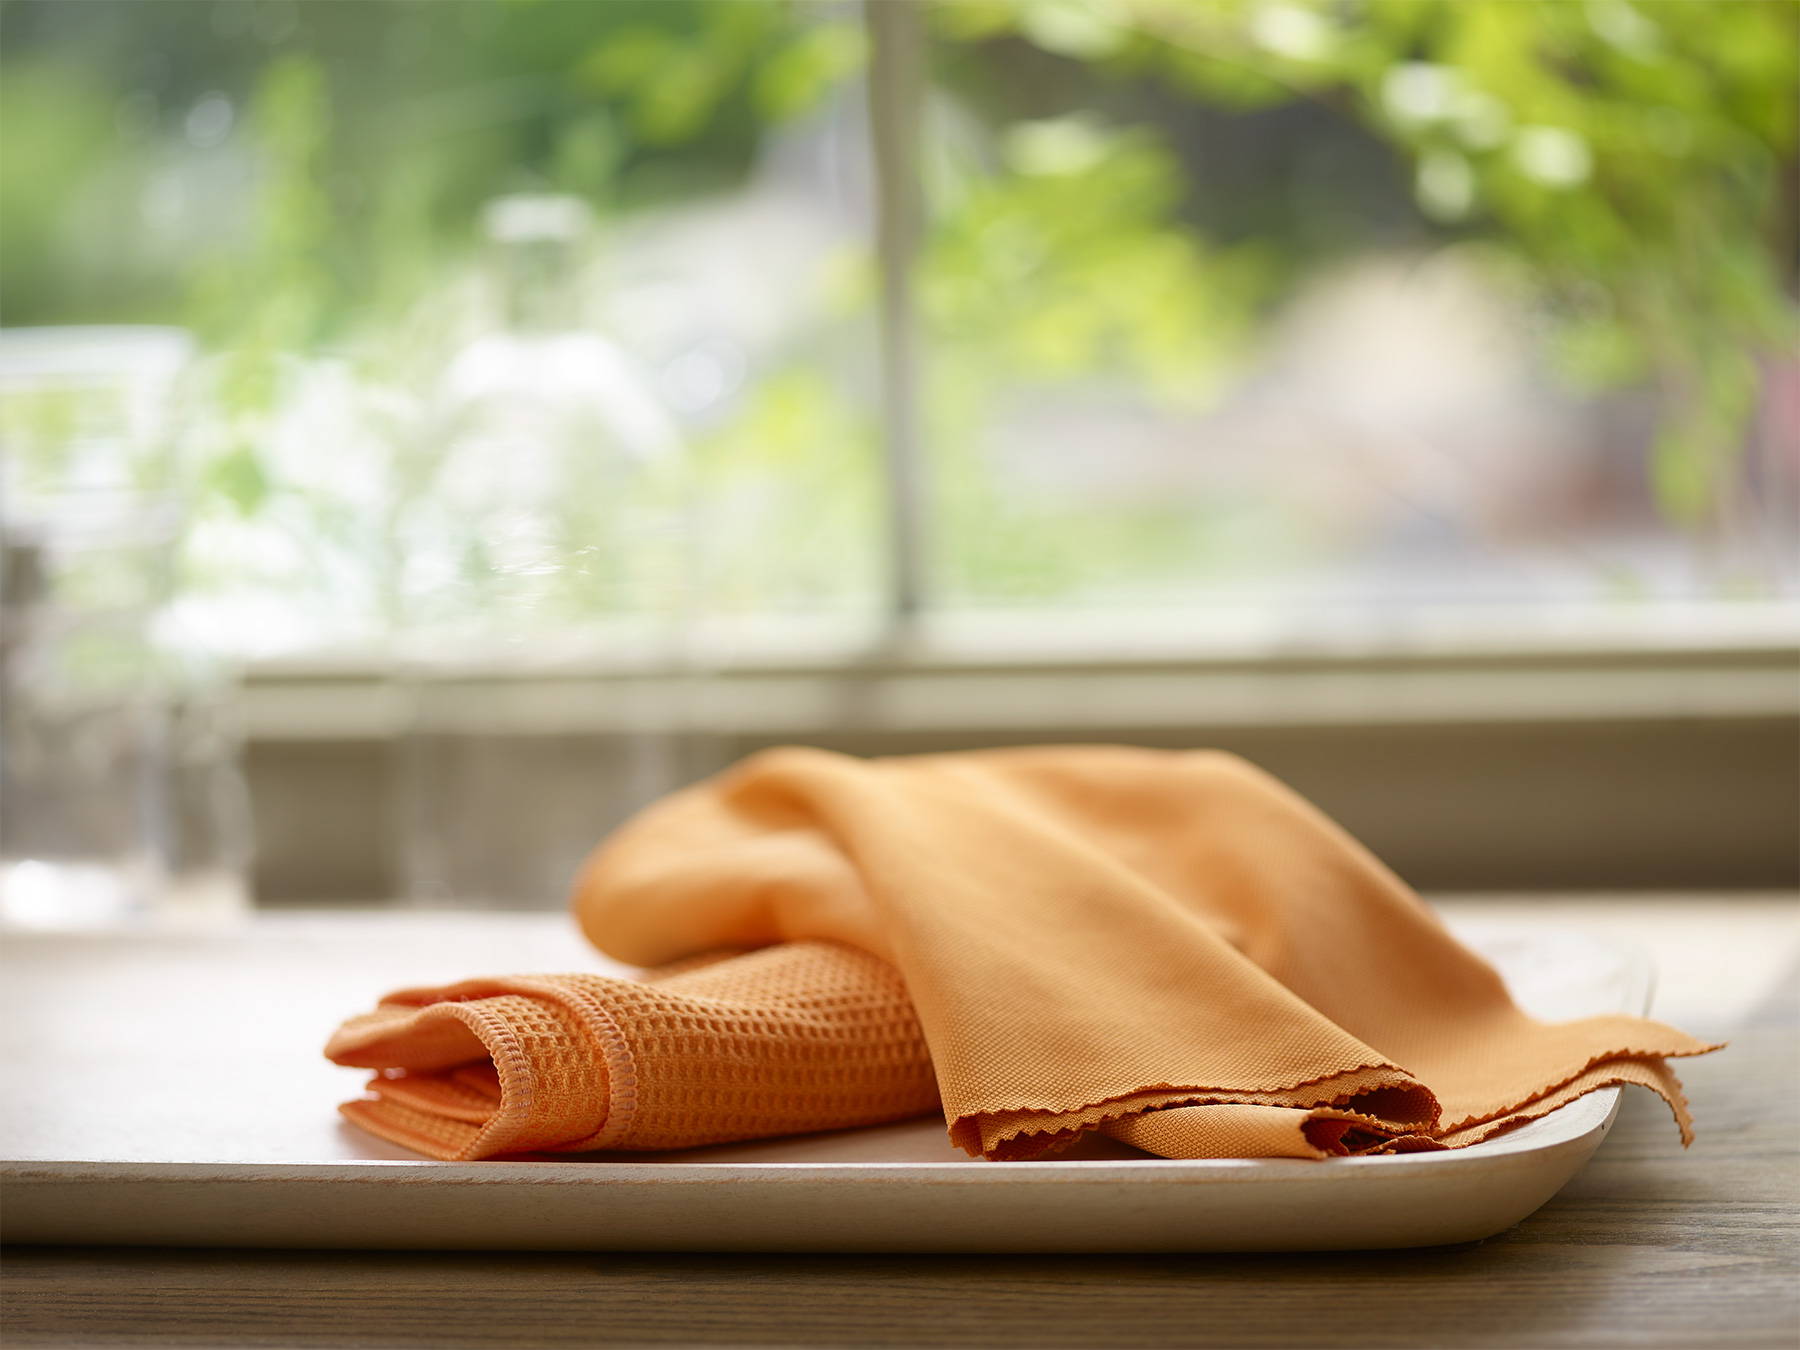 How to Clean Windows With Microfiber Cloth